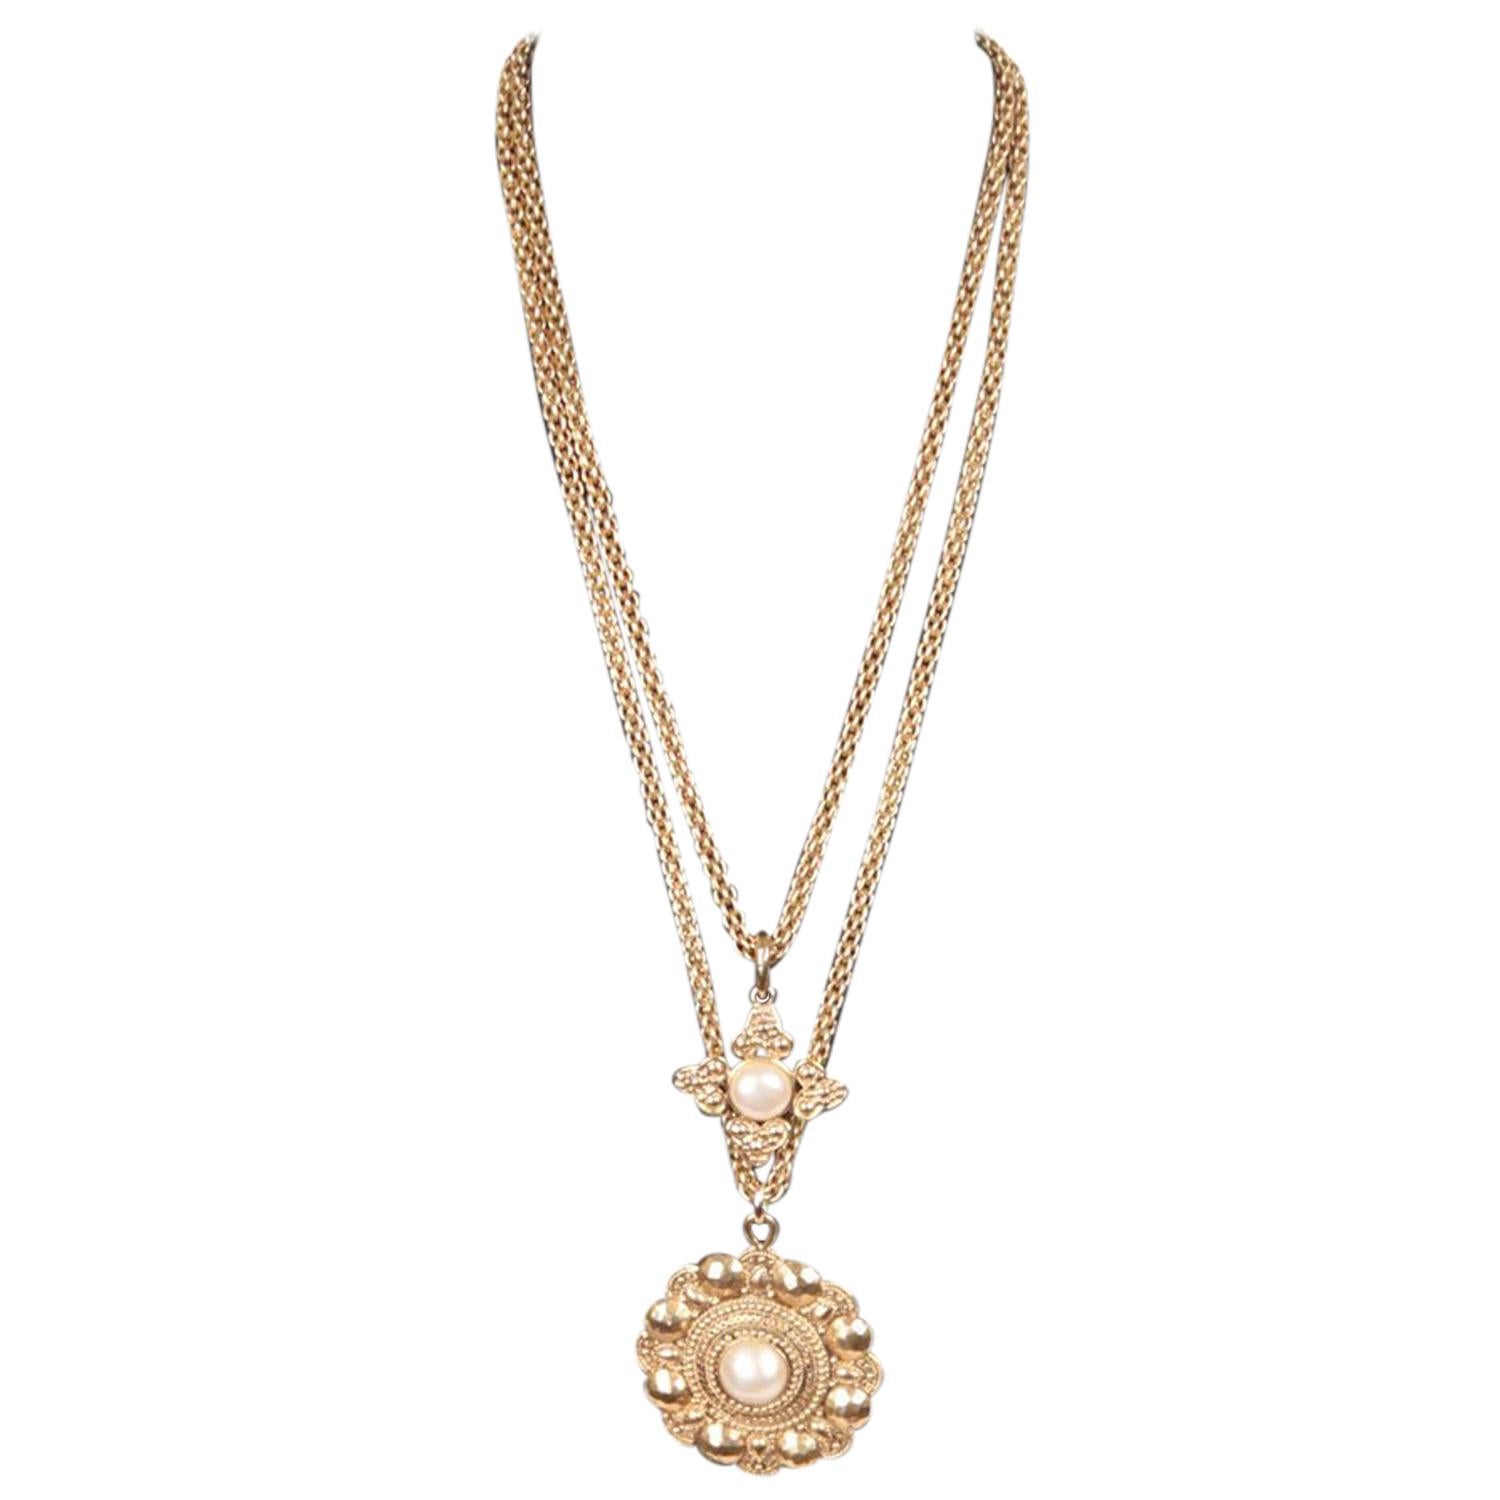 Chanel Vintage Gold Metal 2 Row Long Pendant Necklace with Medallions